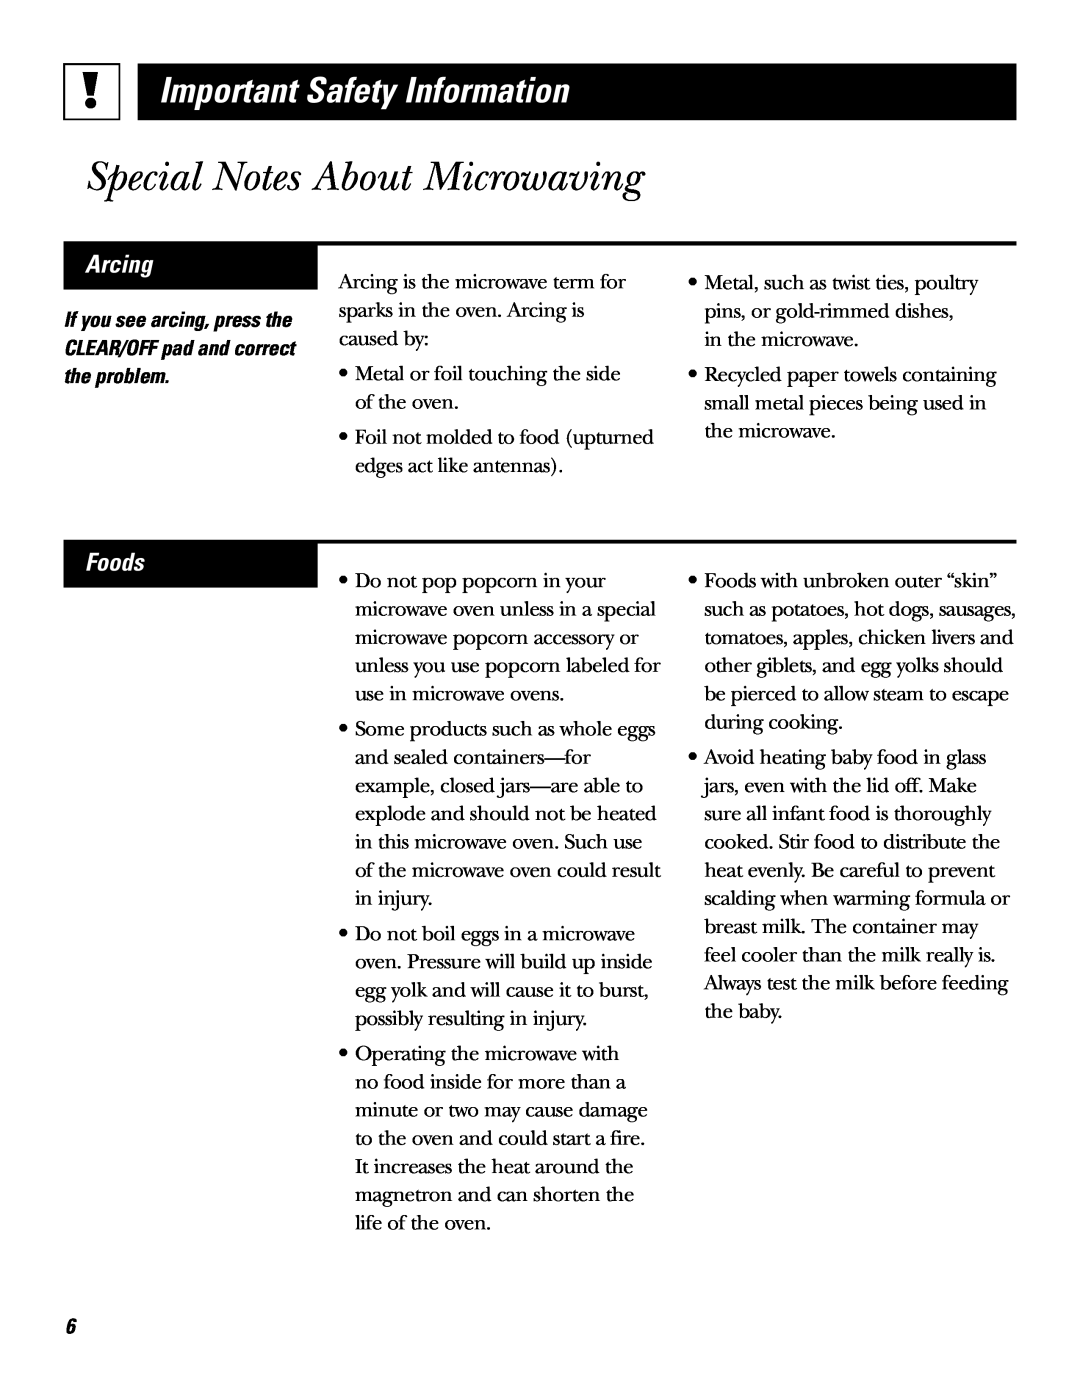 GE JE610, JE620 operating instructions Special Notes About Microwaving, Arcing, Foods, Important Safety Information 